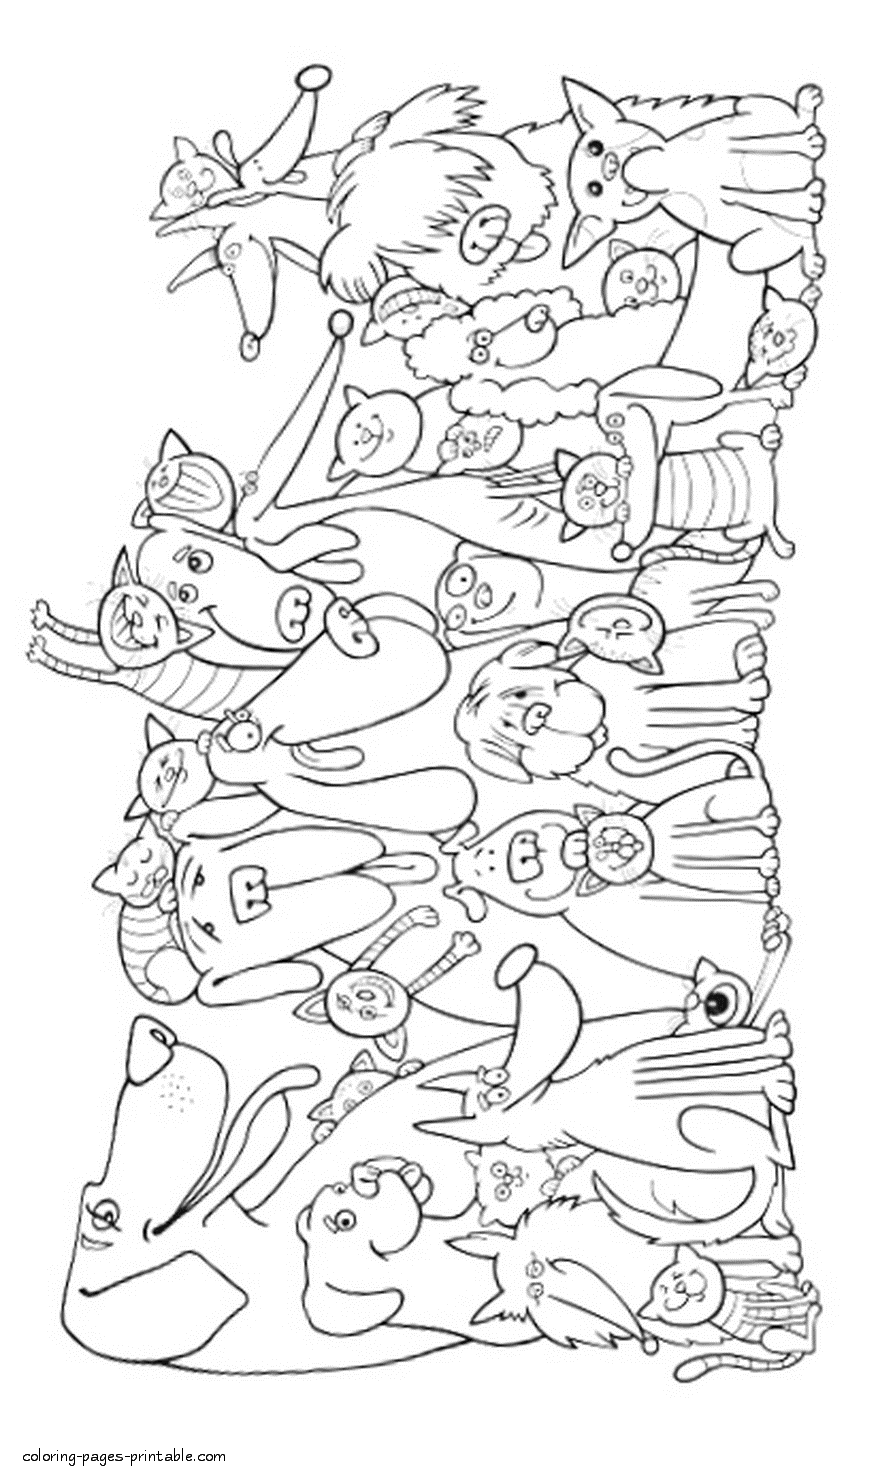 Cats And Dogs Coloring Pages Coloring Pages Printable Com